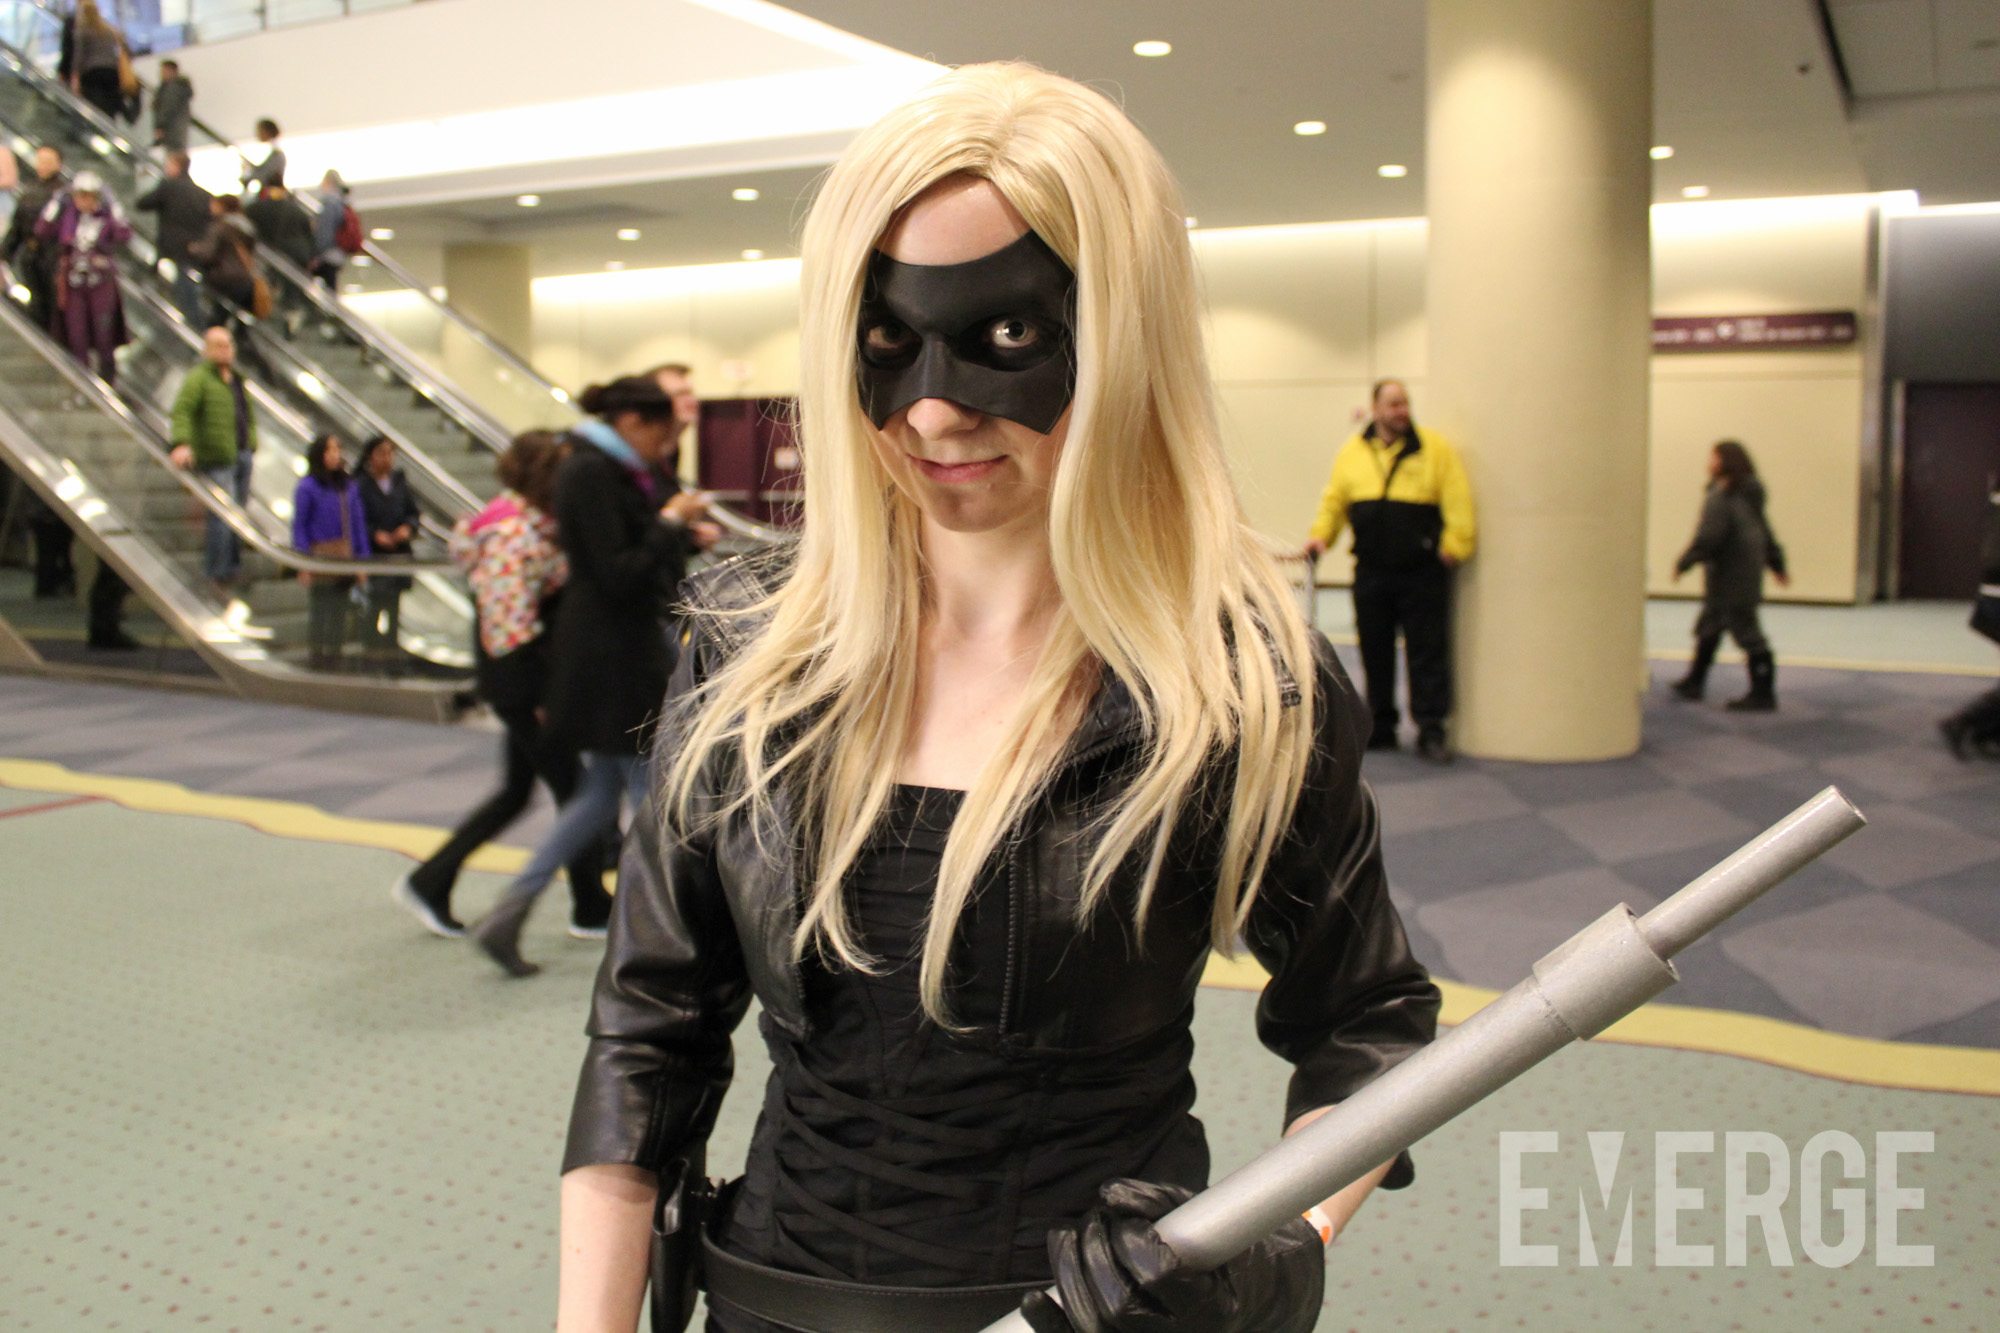 A Black Canary enthusiast using the updated look from the hit CW show "Arrow"